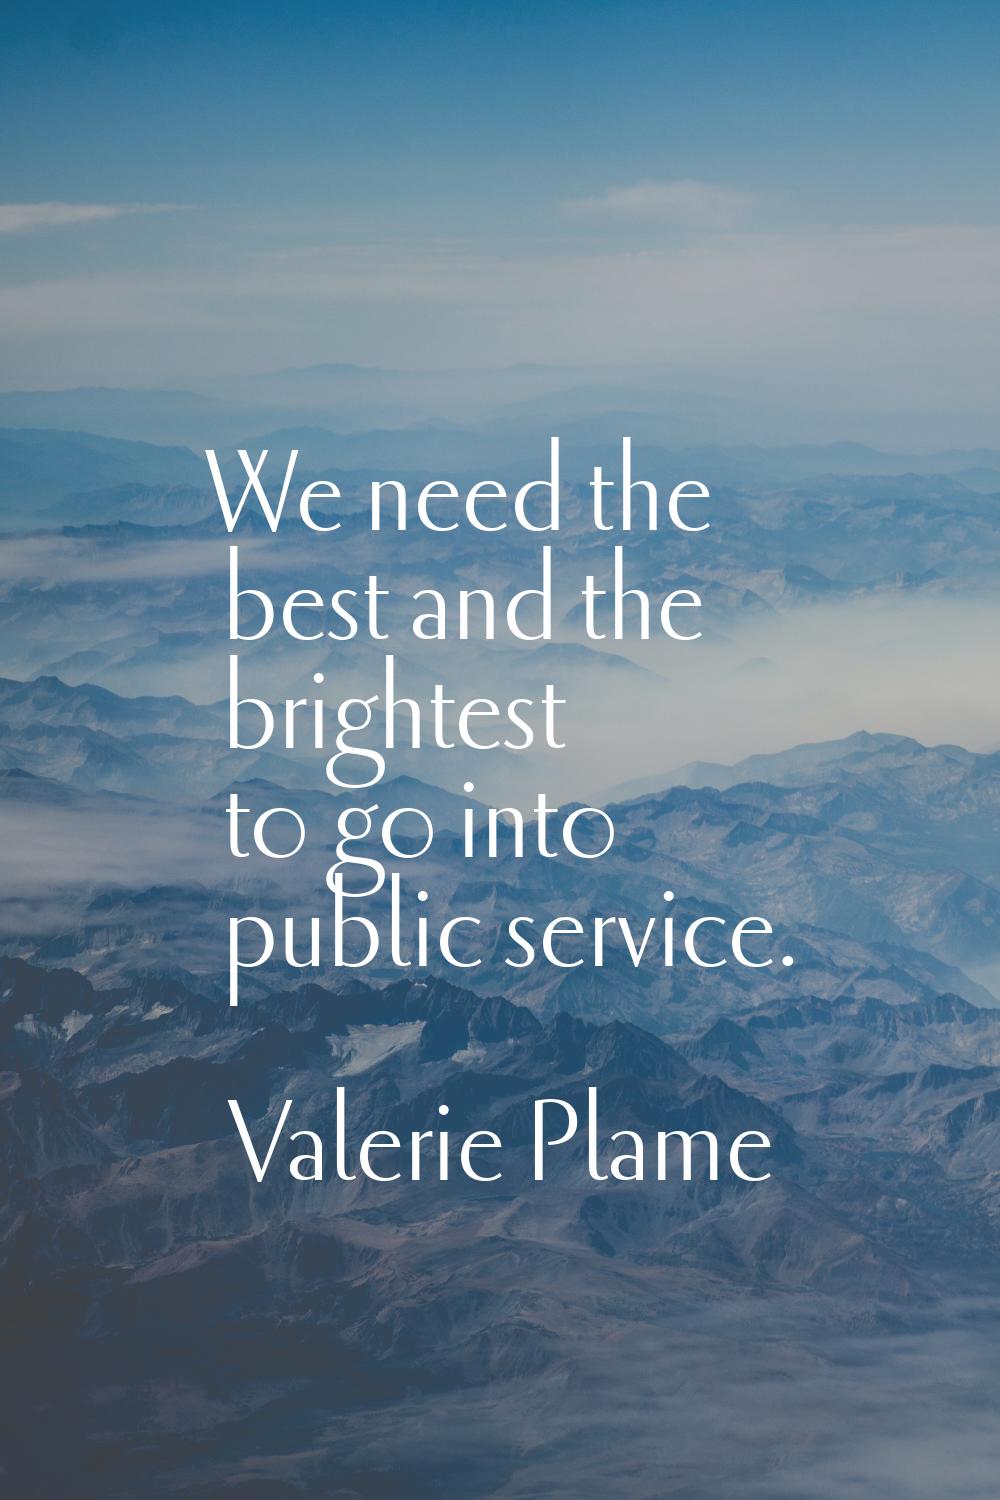 We need the best and the brightest to go into public service.